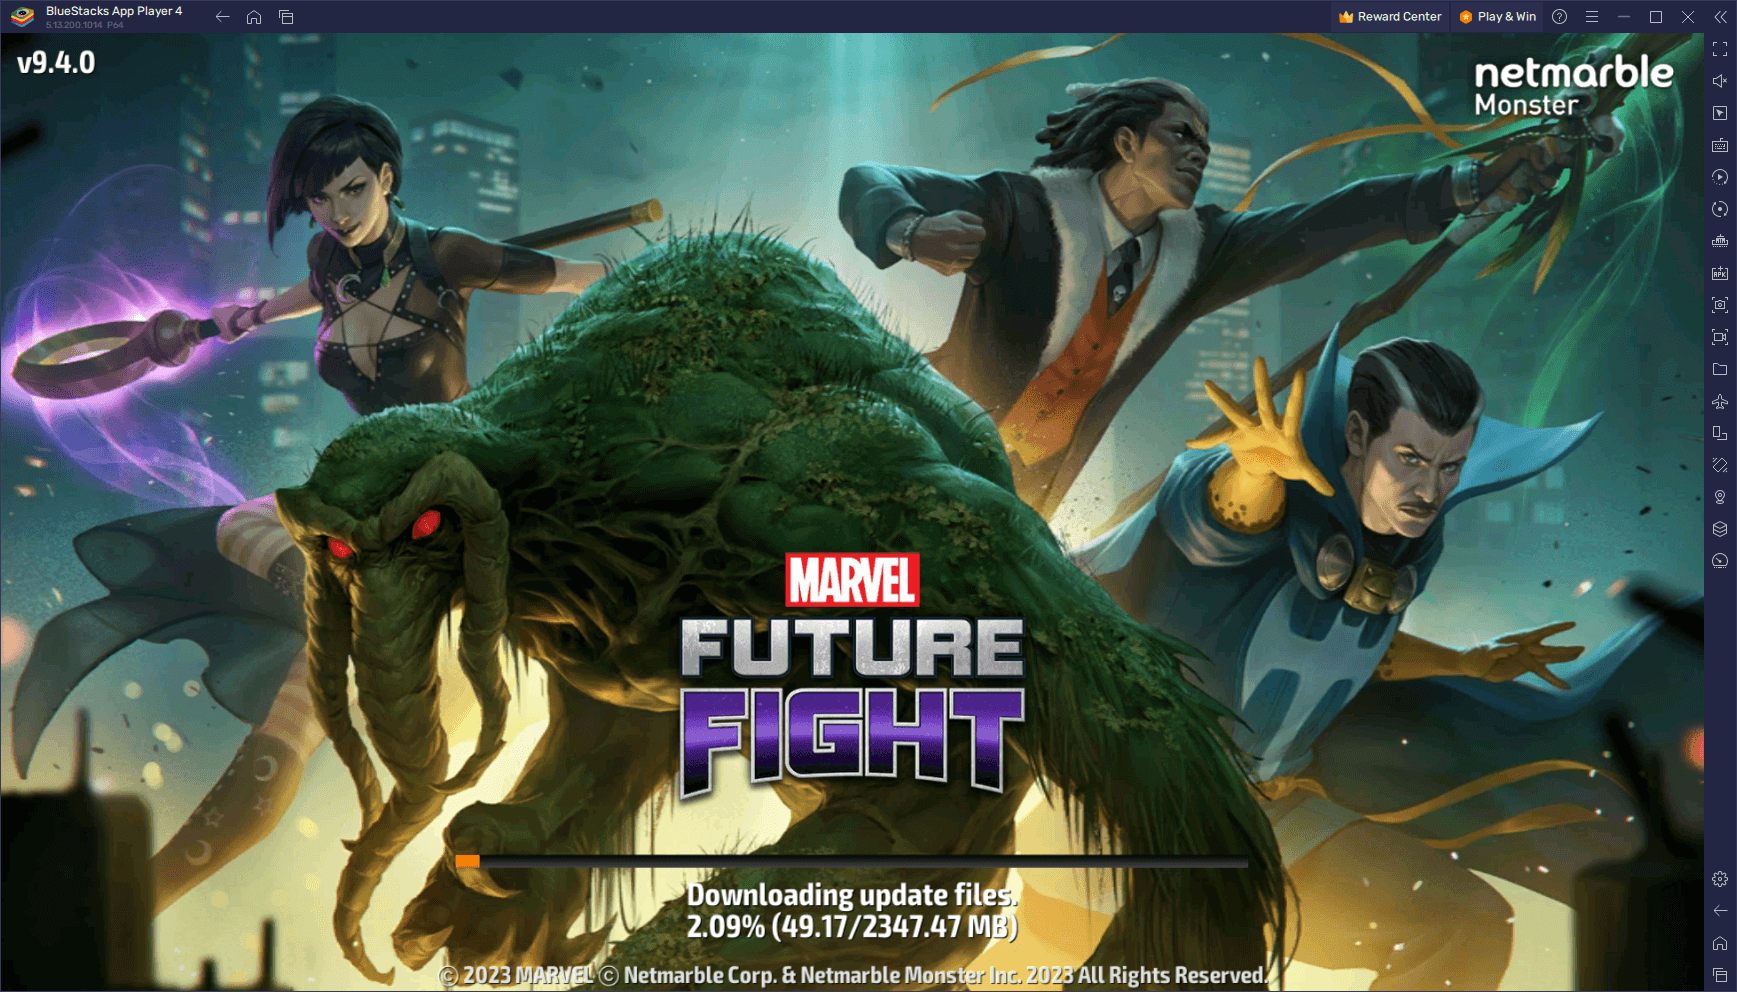 Marvel's Midnight Suns  Download and Buy Today - Epic Games Store